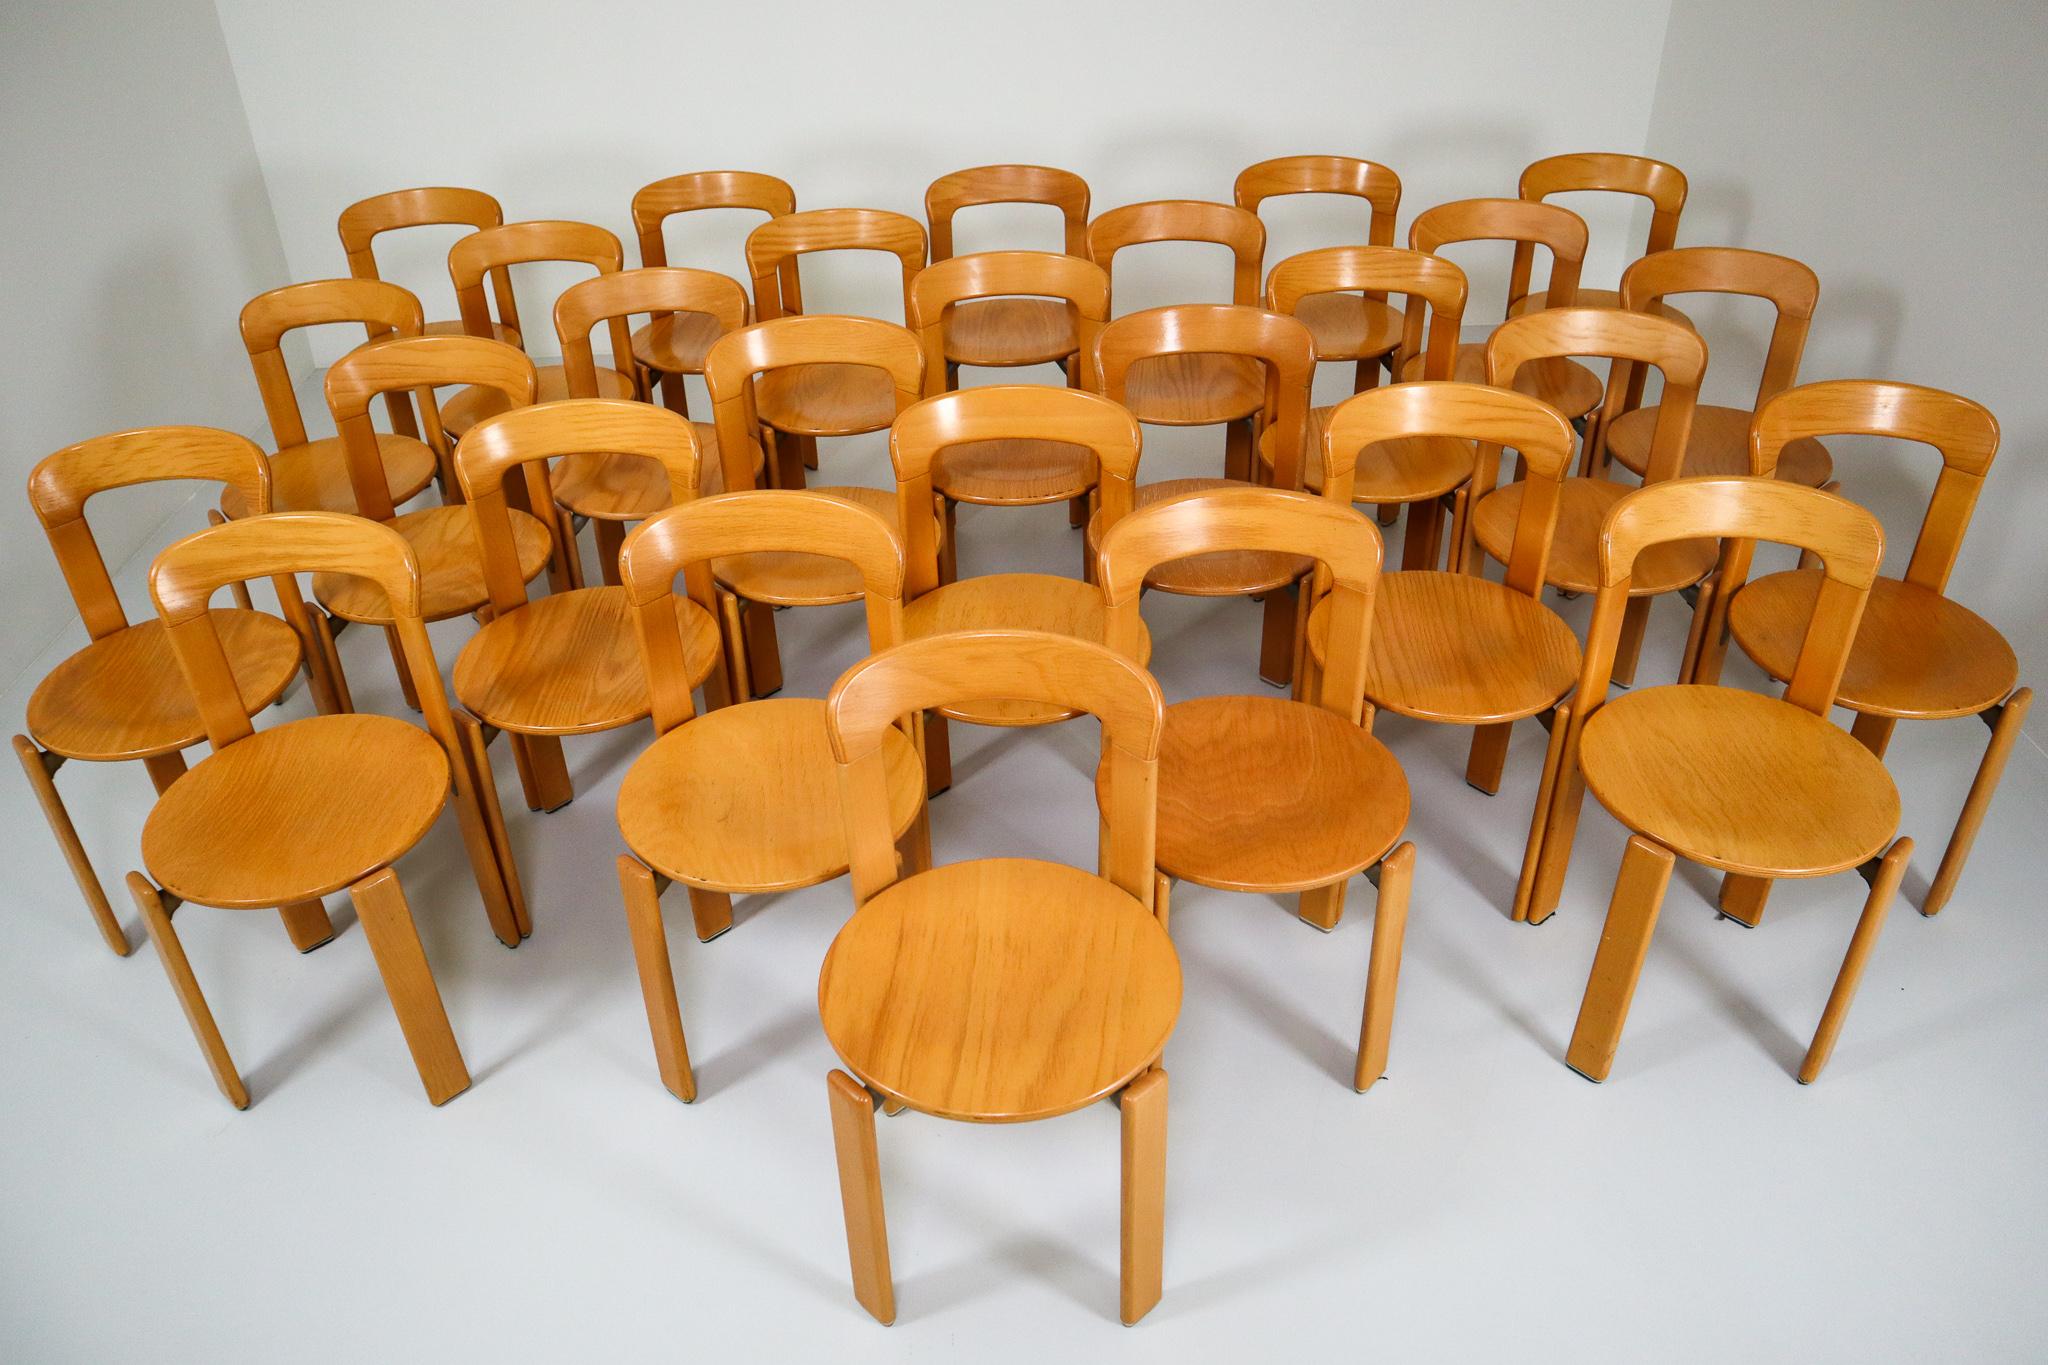 The set of 28 dining room chairs were designed by Bruno Rey for Kusch and Co., 1970s. The dining room chairs were made of solid beech, laminated plywood beech and cast aluminum, characteristic steel brackets support wooden round seat. These chairs